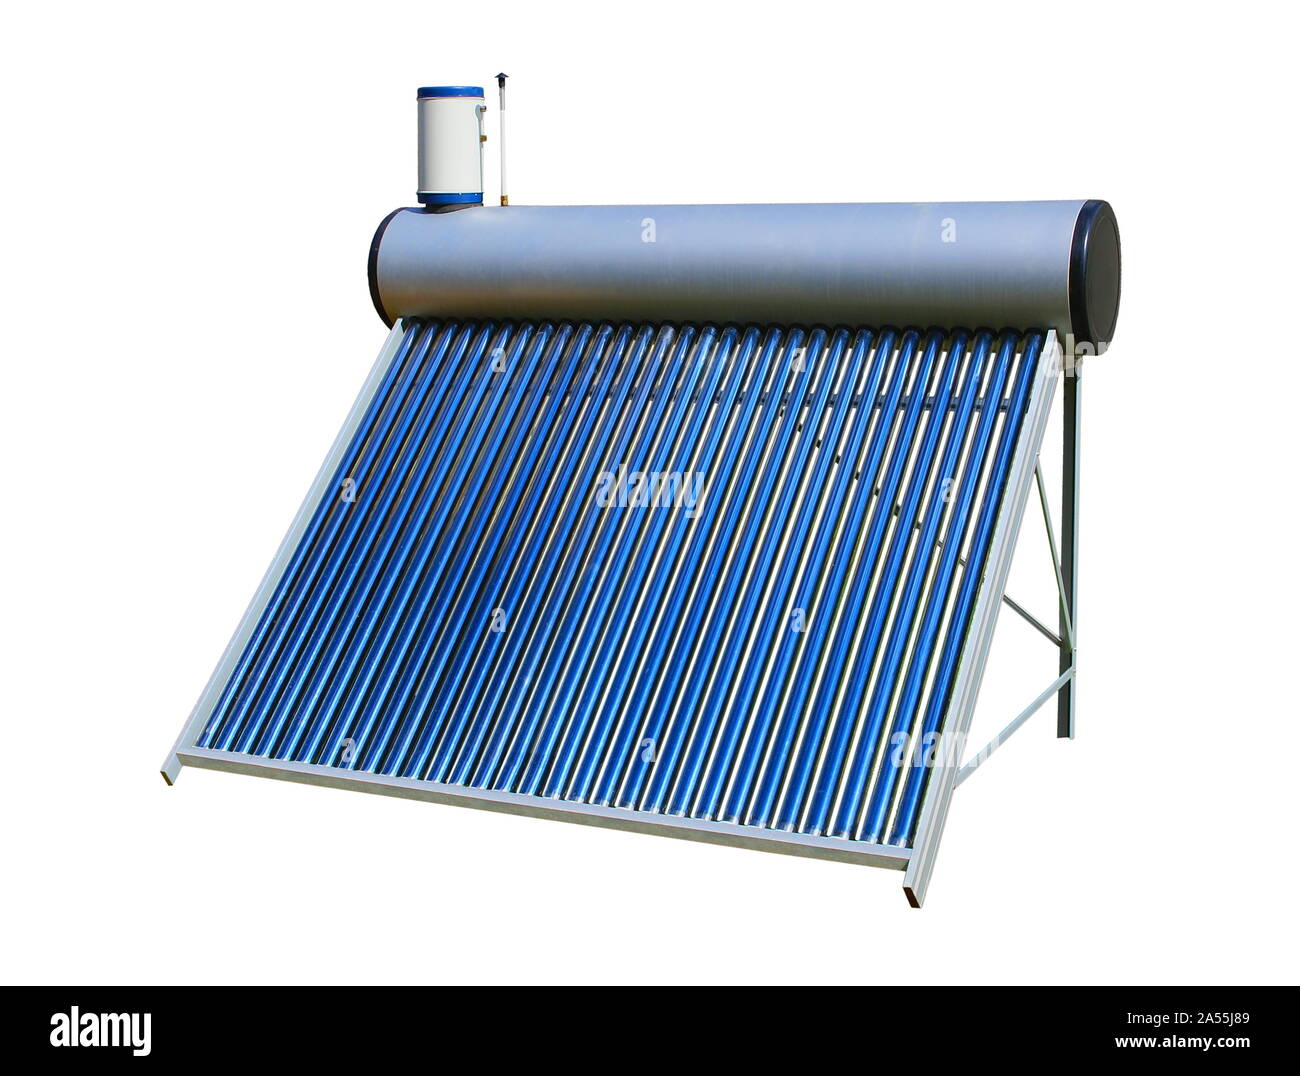 Solar water heater standing on the ground isolated on white background Stock Photo